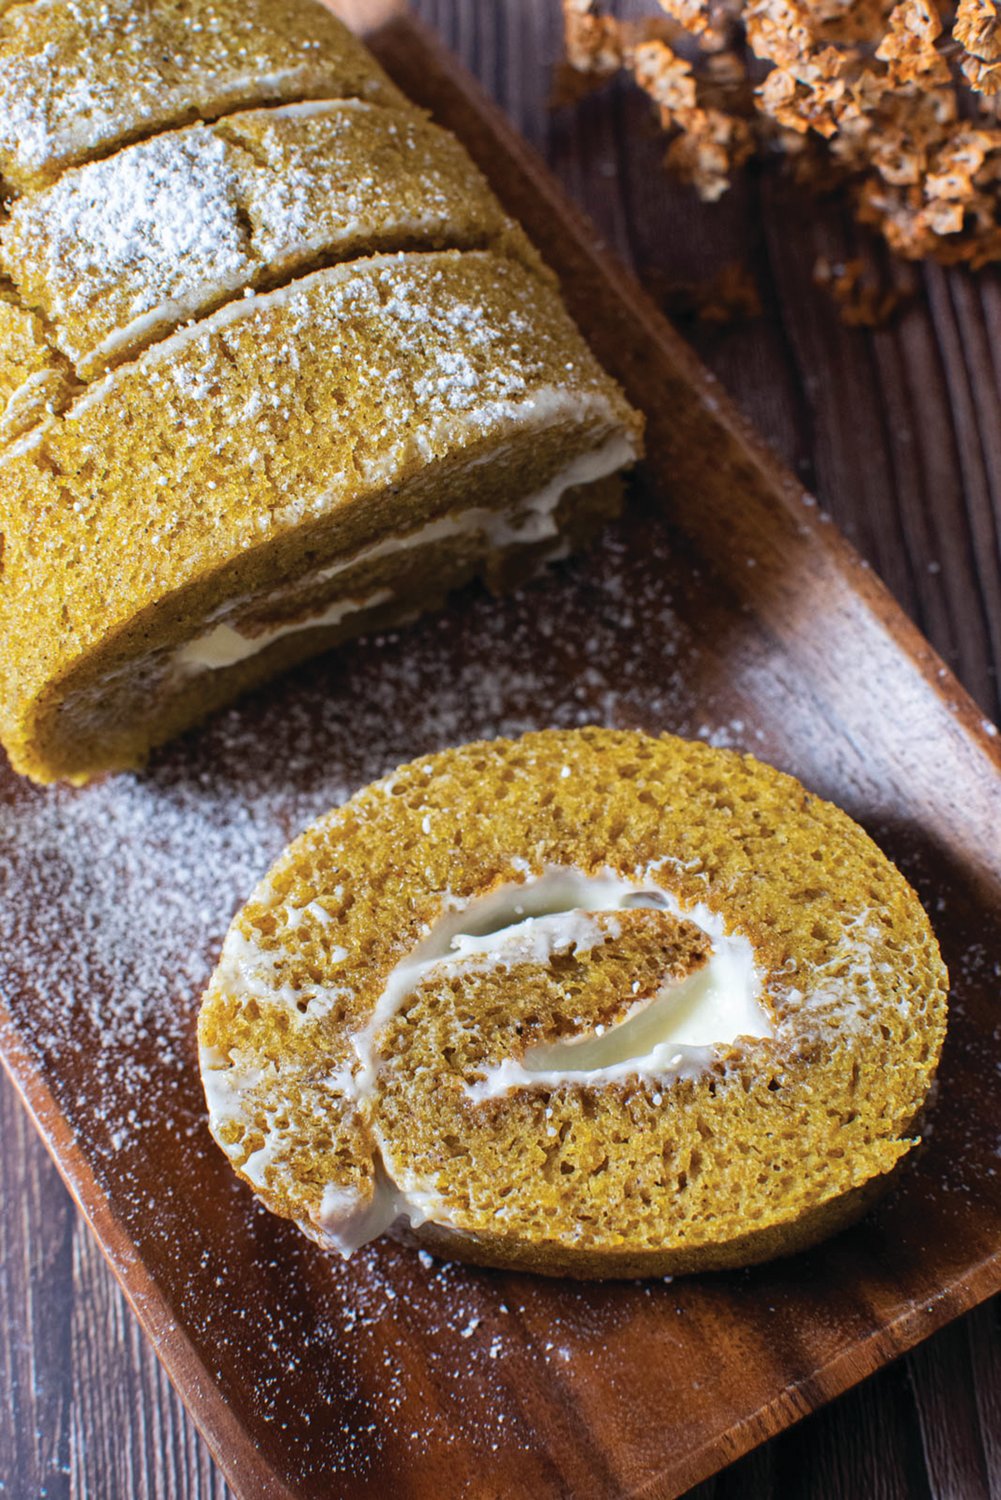 Pumpkin rolls are popular item this time of year.